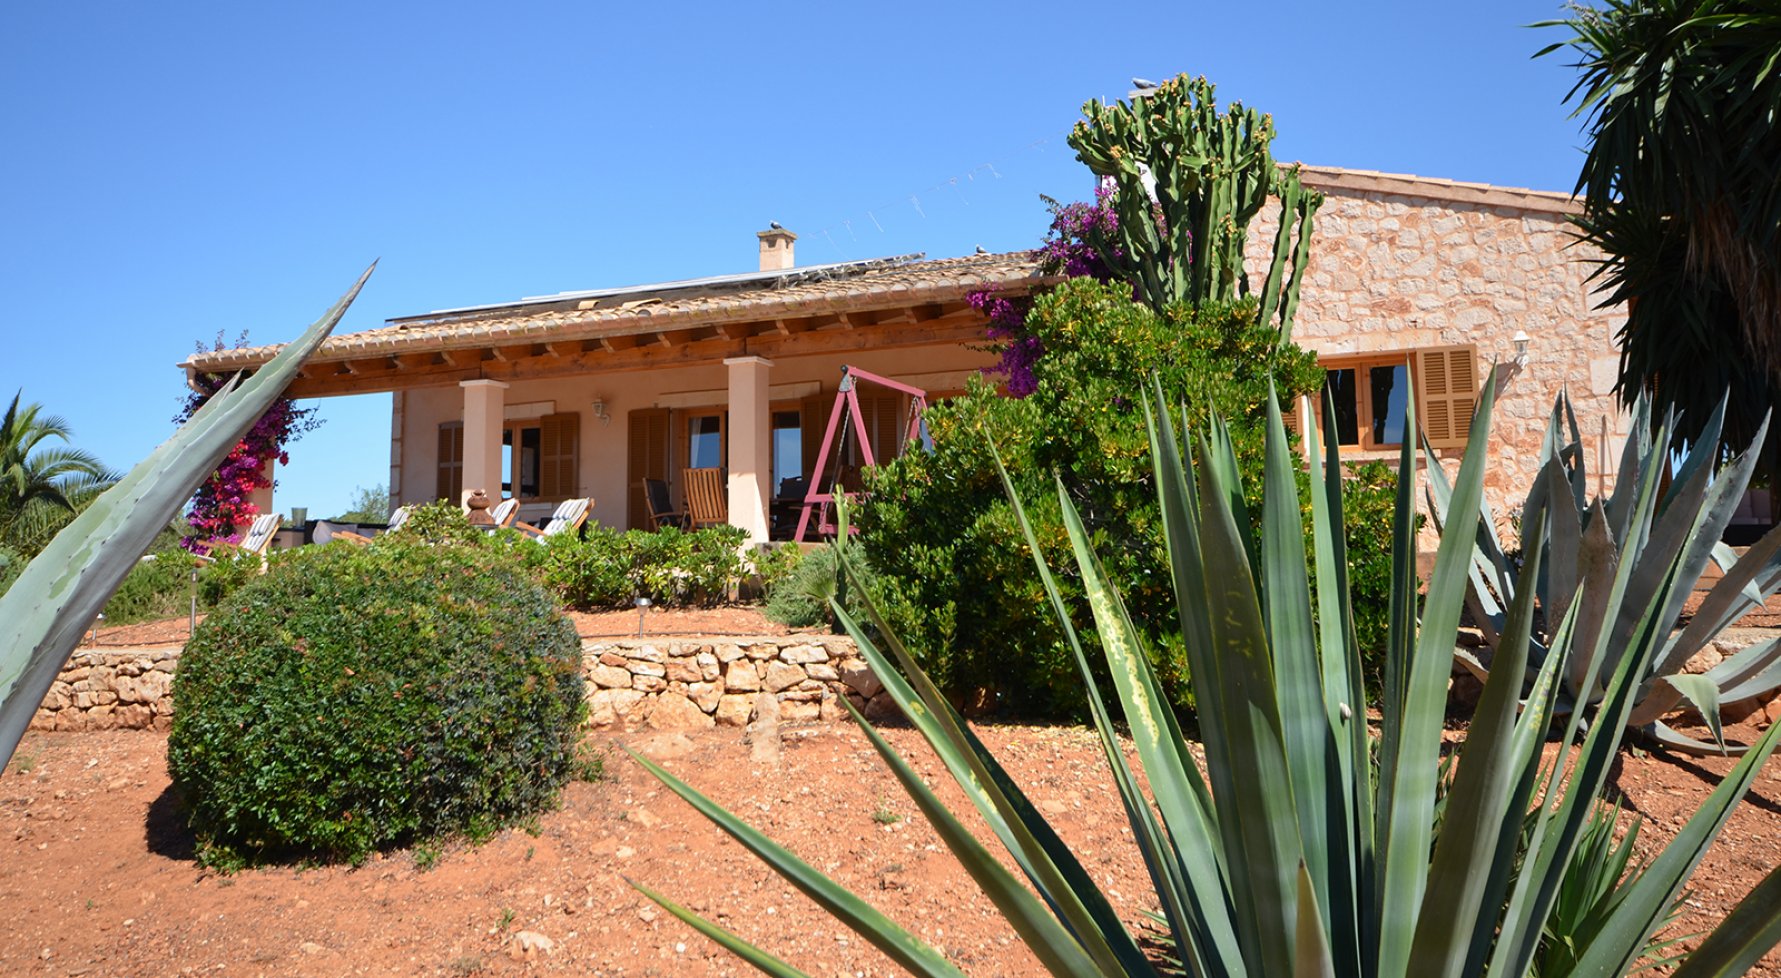 Property in 07650 Spanien - Santanyí: Charming country house with holiday rental licence near Santanyí - picture 1